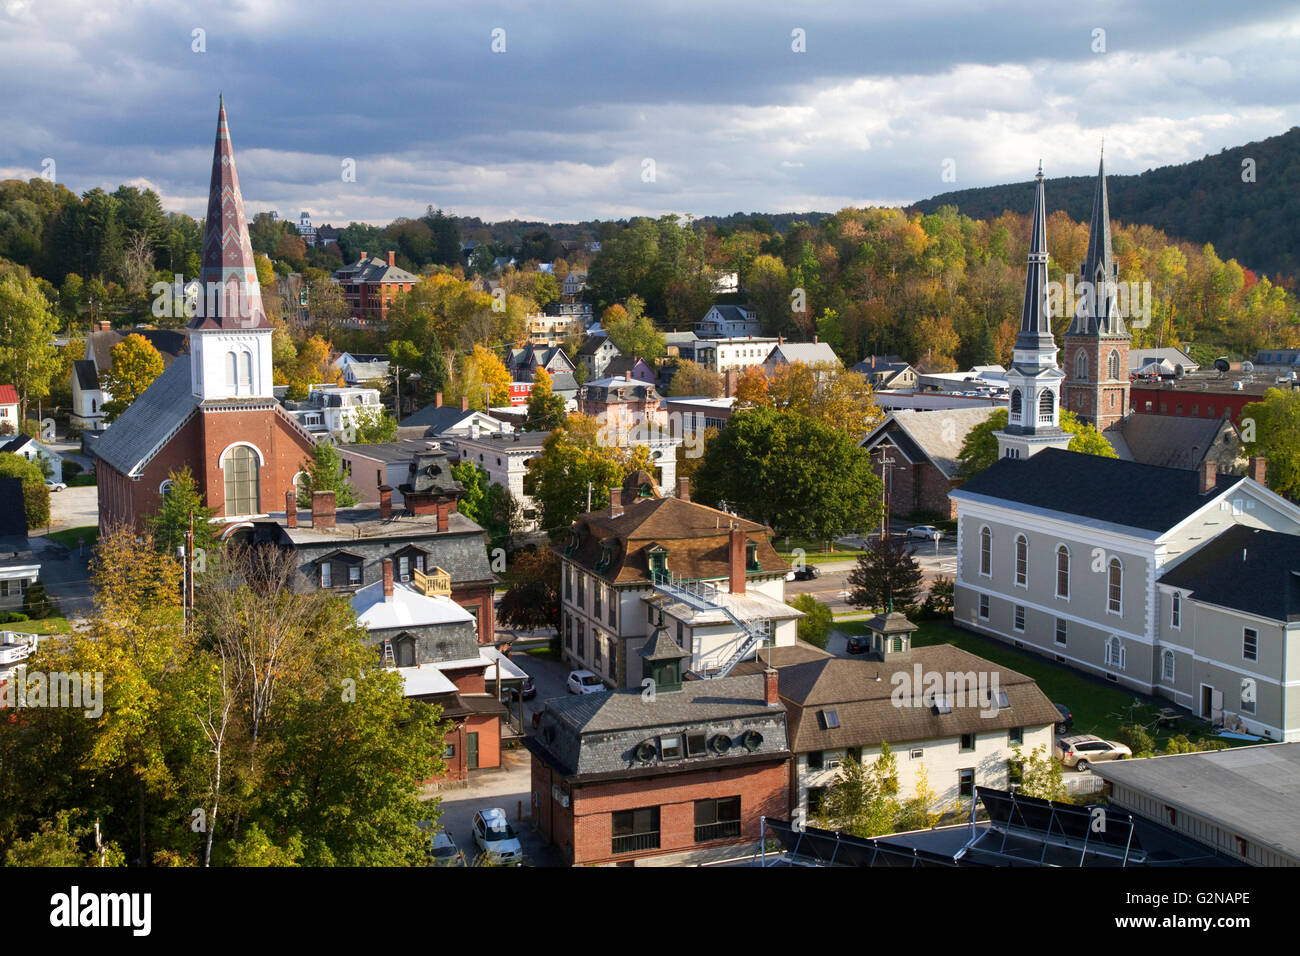 The town of Montpelier, Vermont, USA. Stock Photo